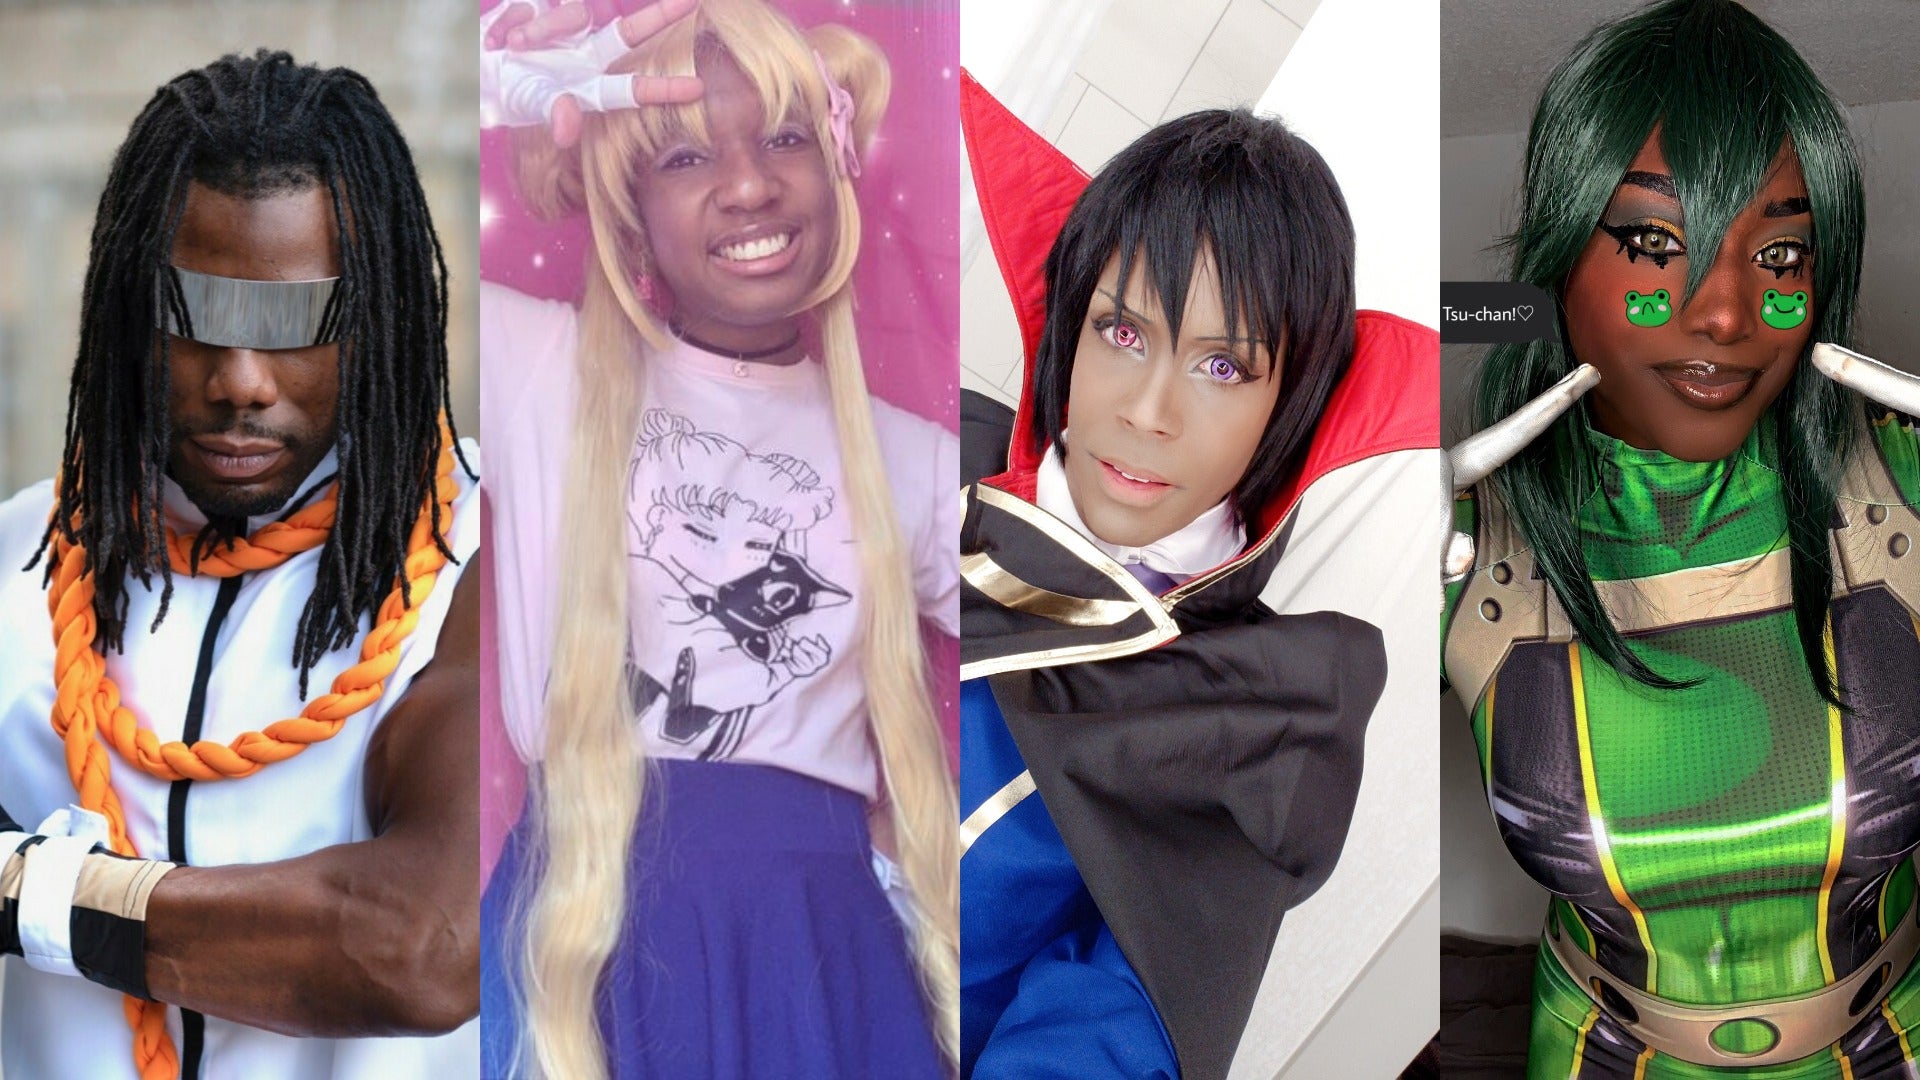 Black Anime Cosplayers Discuss Representation In Anime | Cosplay Central